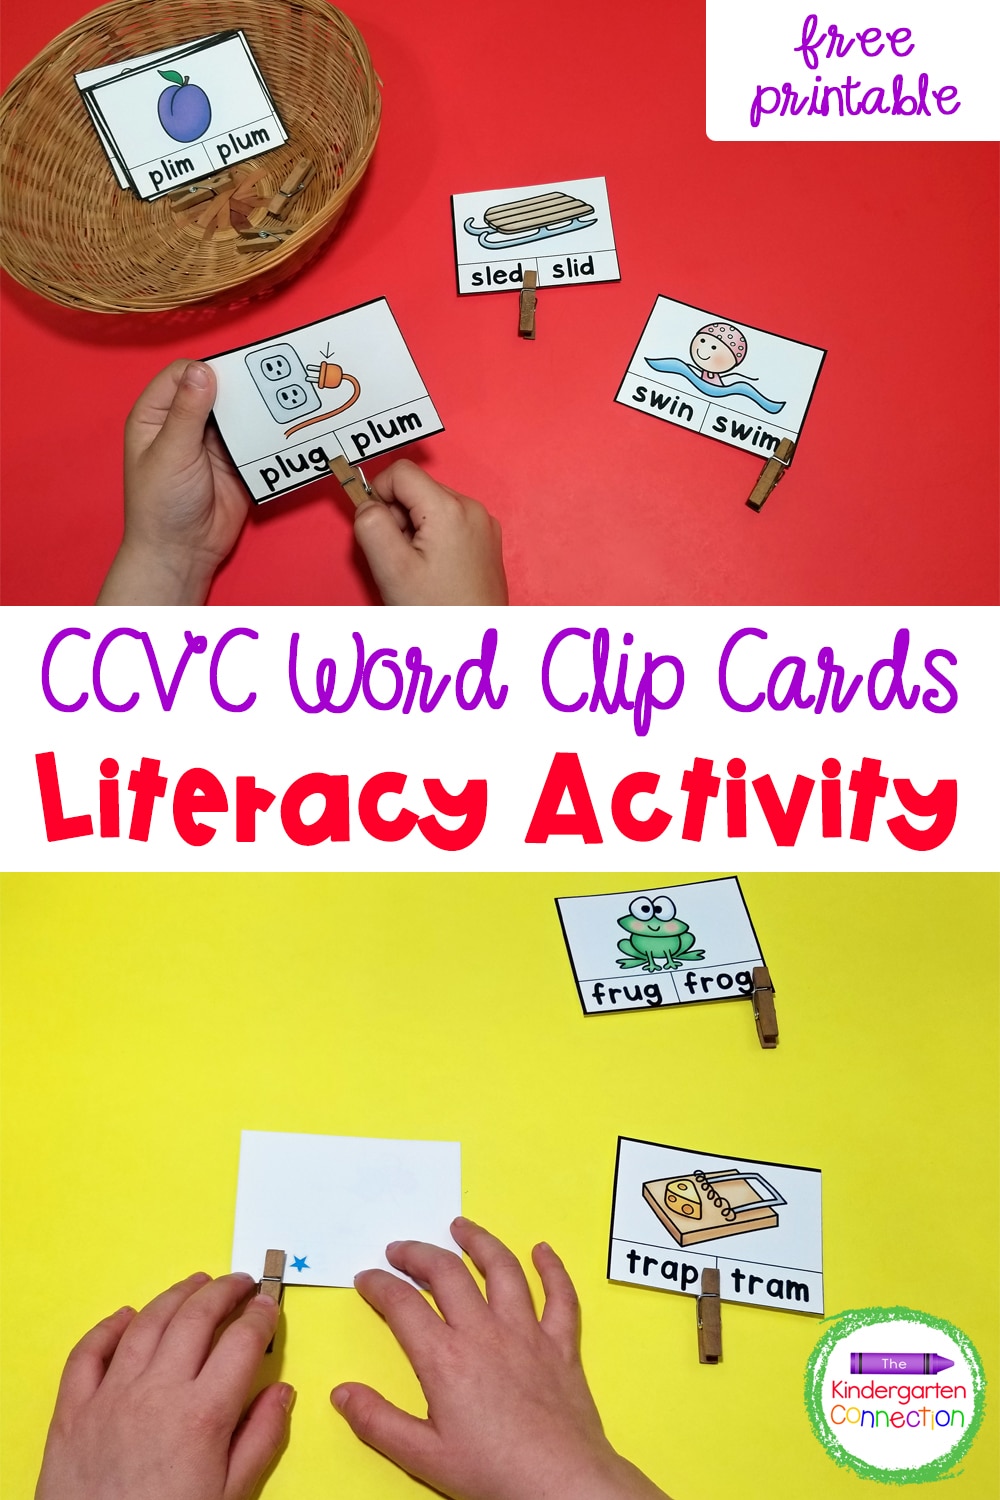 CCVC Word Blending Cards Cards for Learning Center 52 Cards-Letters 